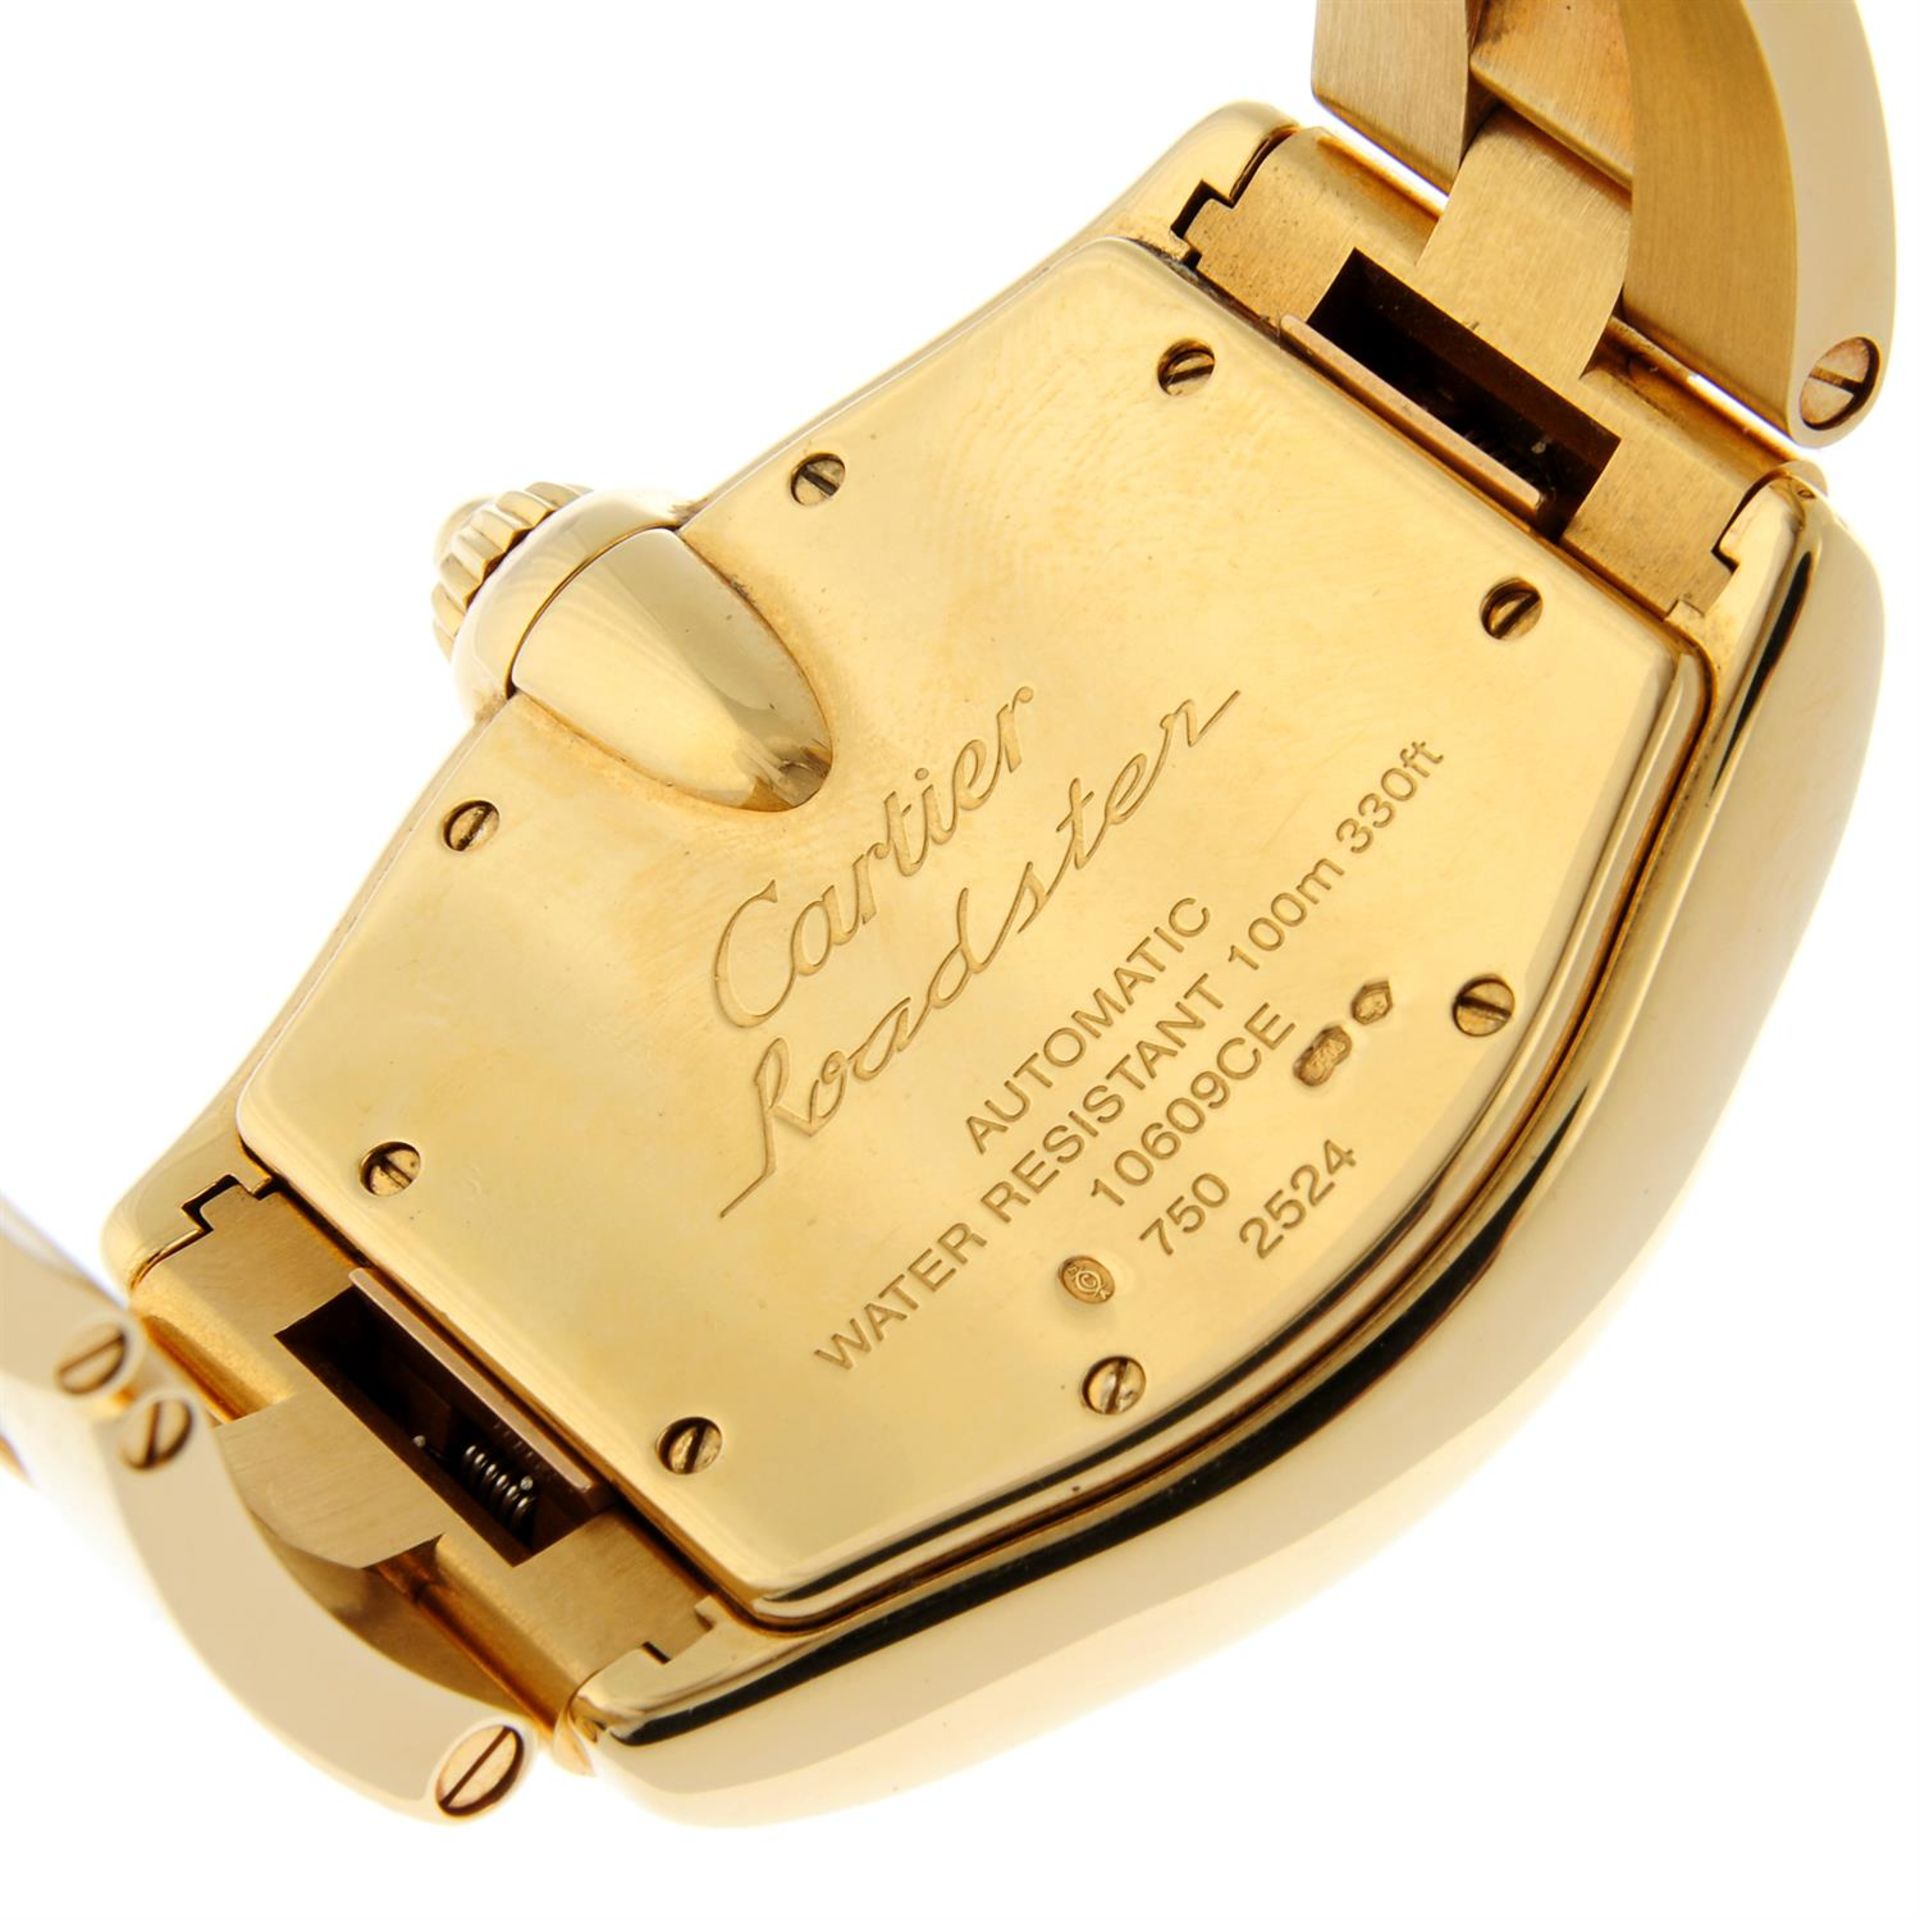 CARTIER - an 18ct yellow gold Roadster bracelet watch, 38mm. - Image 4 of 9